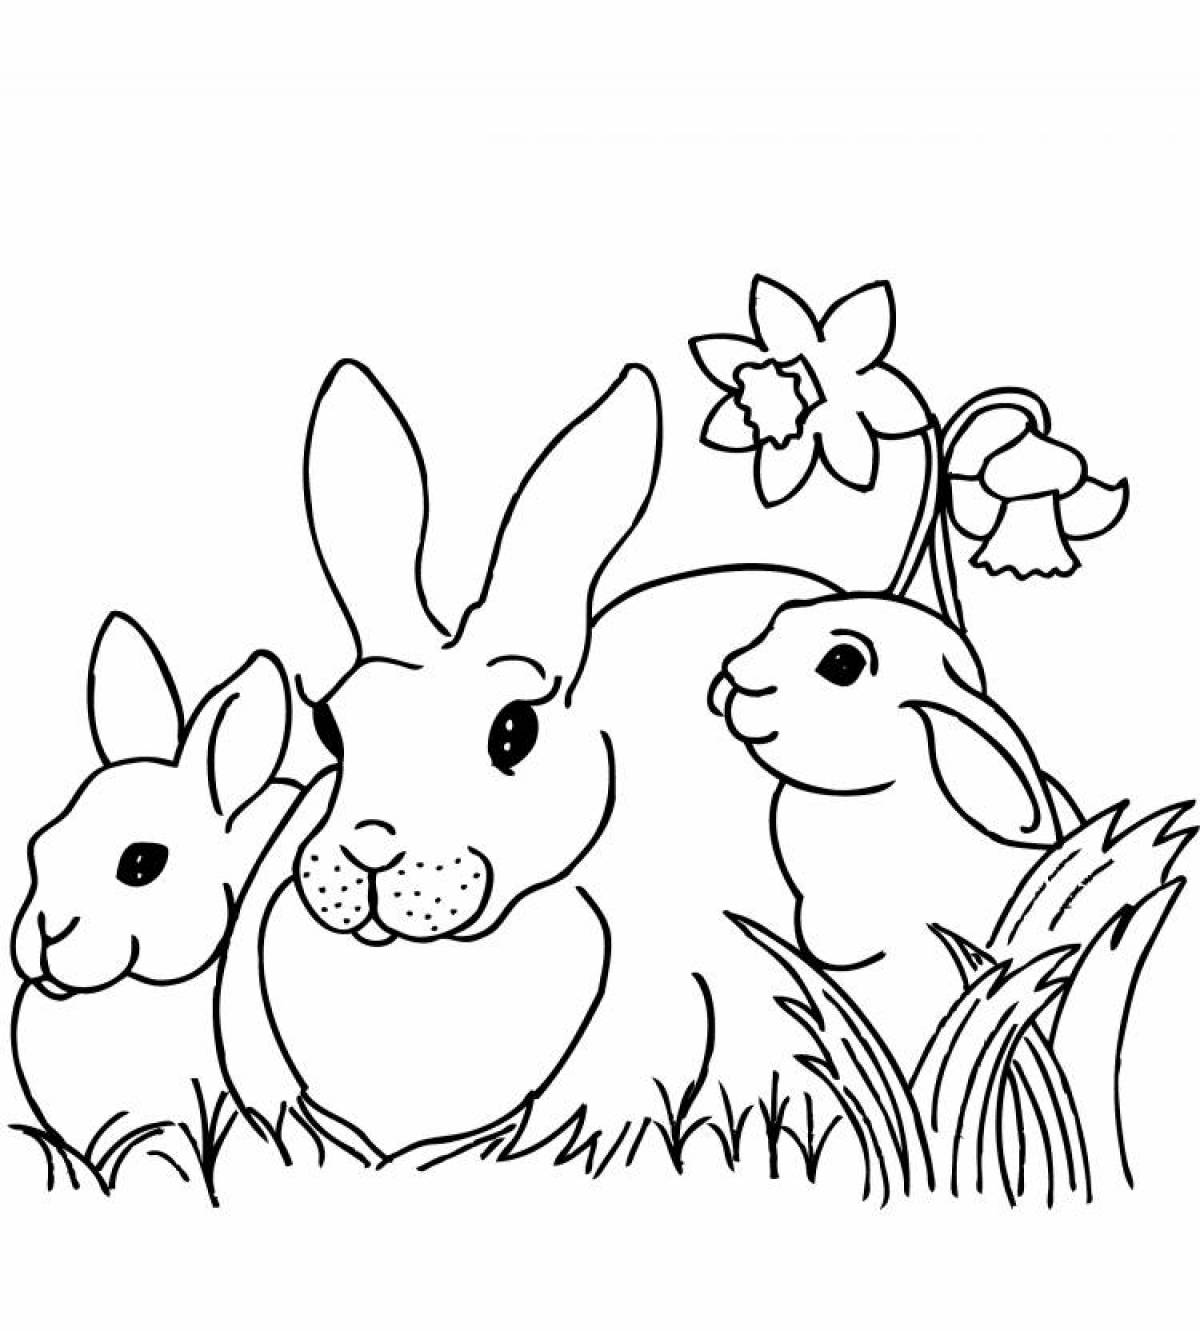 Curious bunny coloring book for kids